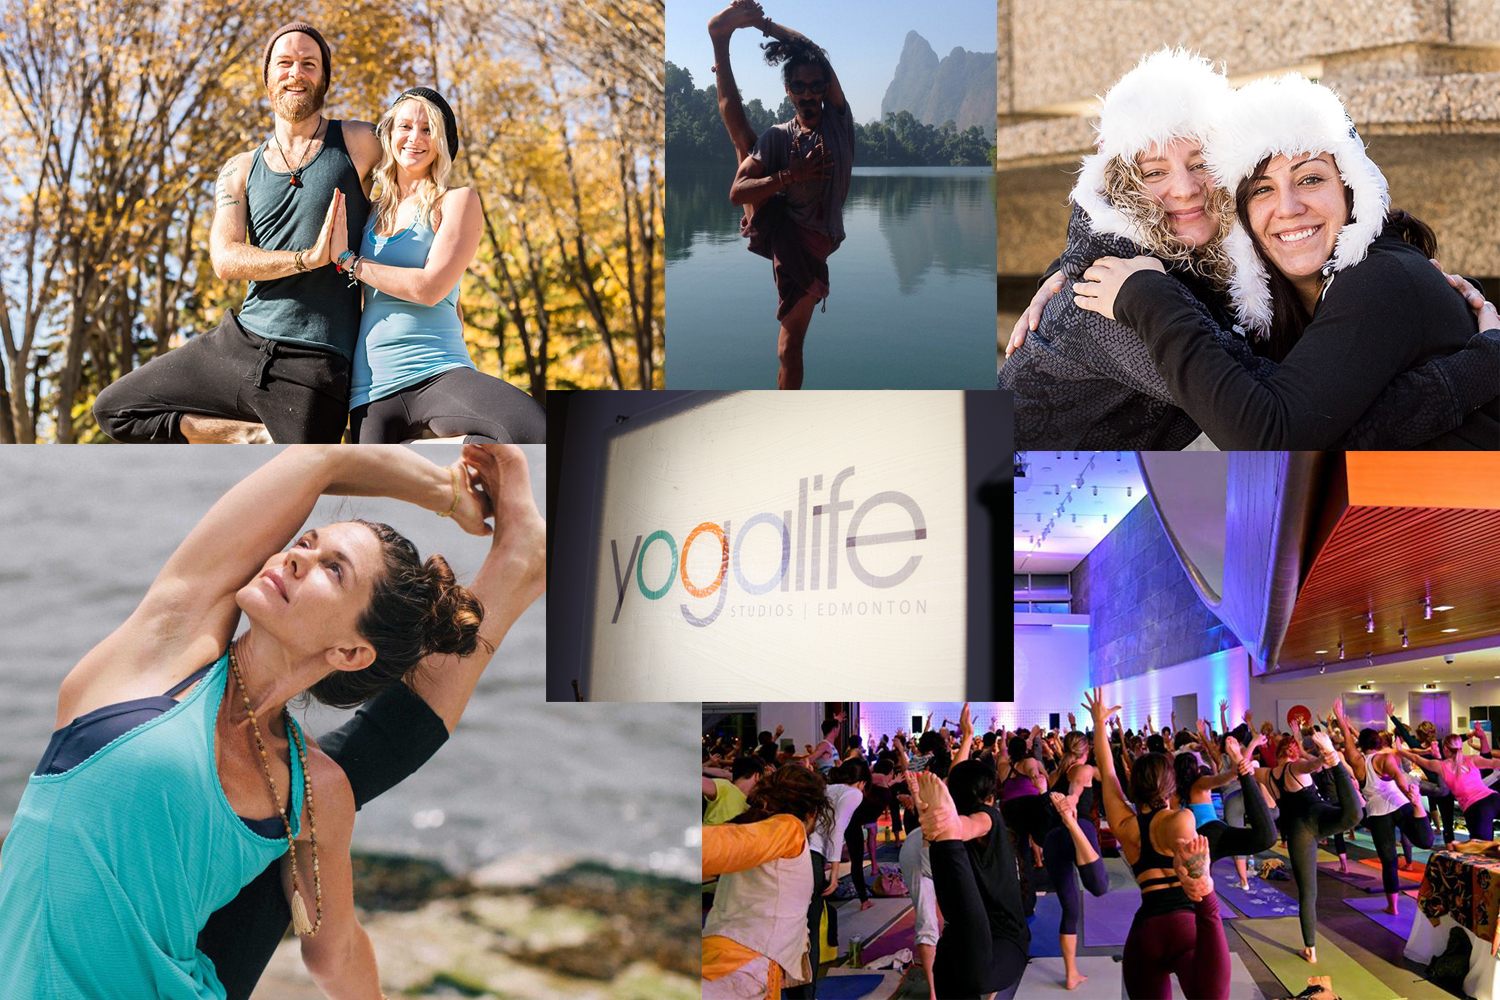 Happy New Year from the Yogalife family!